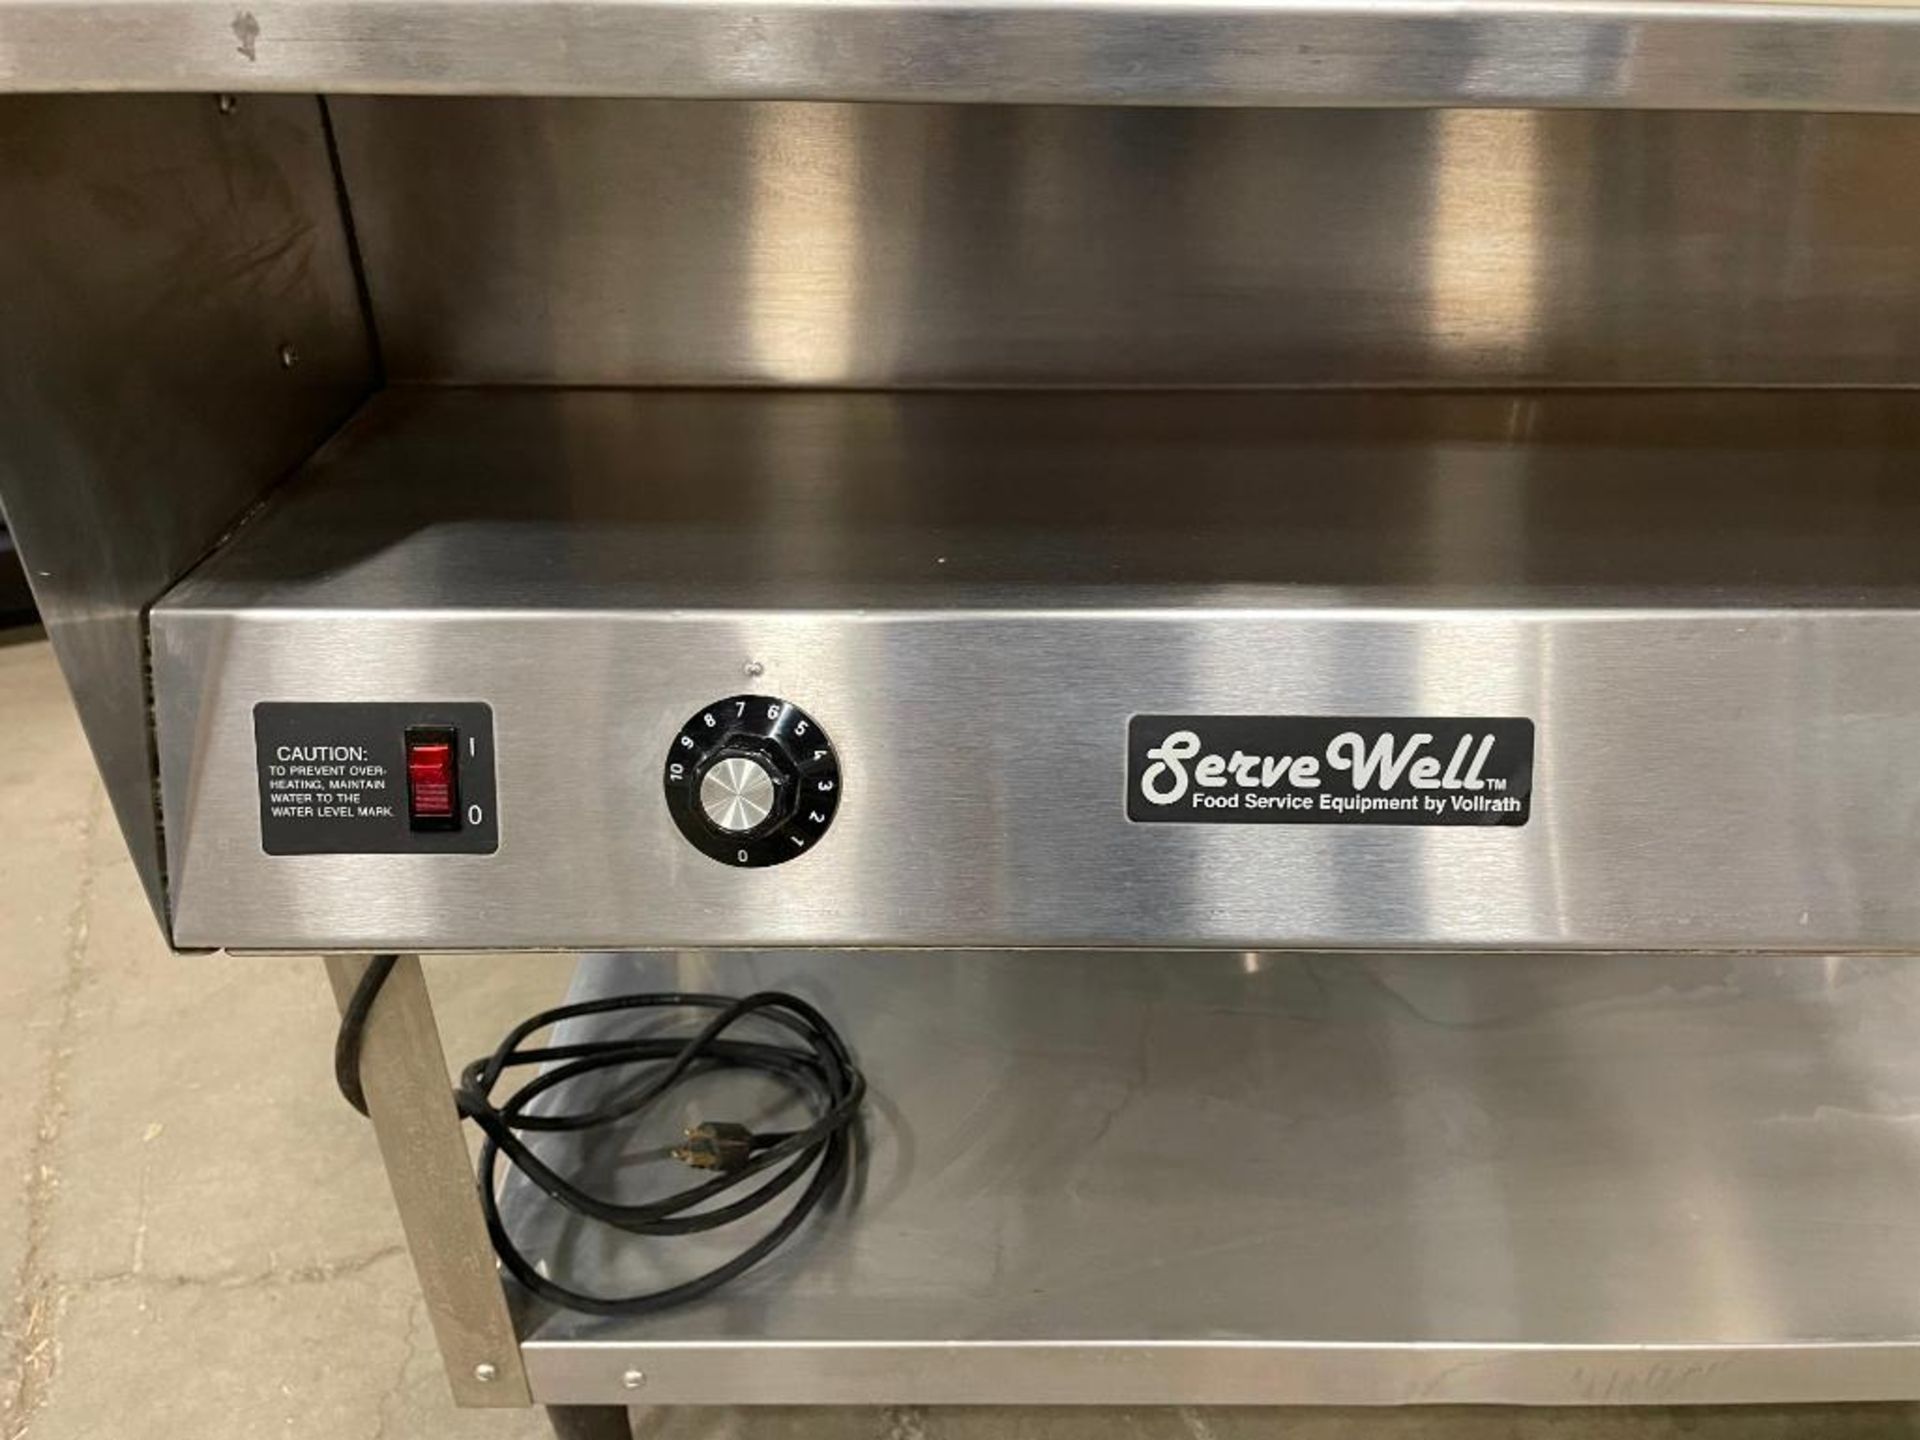 VOLLRATH 38003 3-WELL SERVEWELL STAINLESS STEEL STEAM TABLE - Image 15 of 17